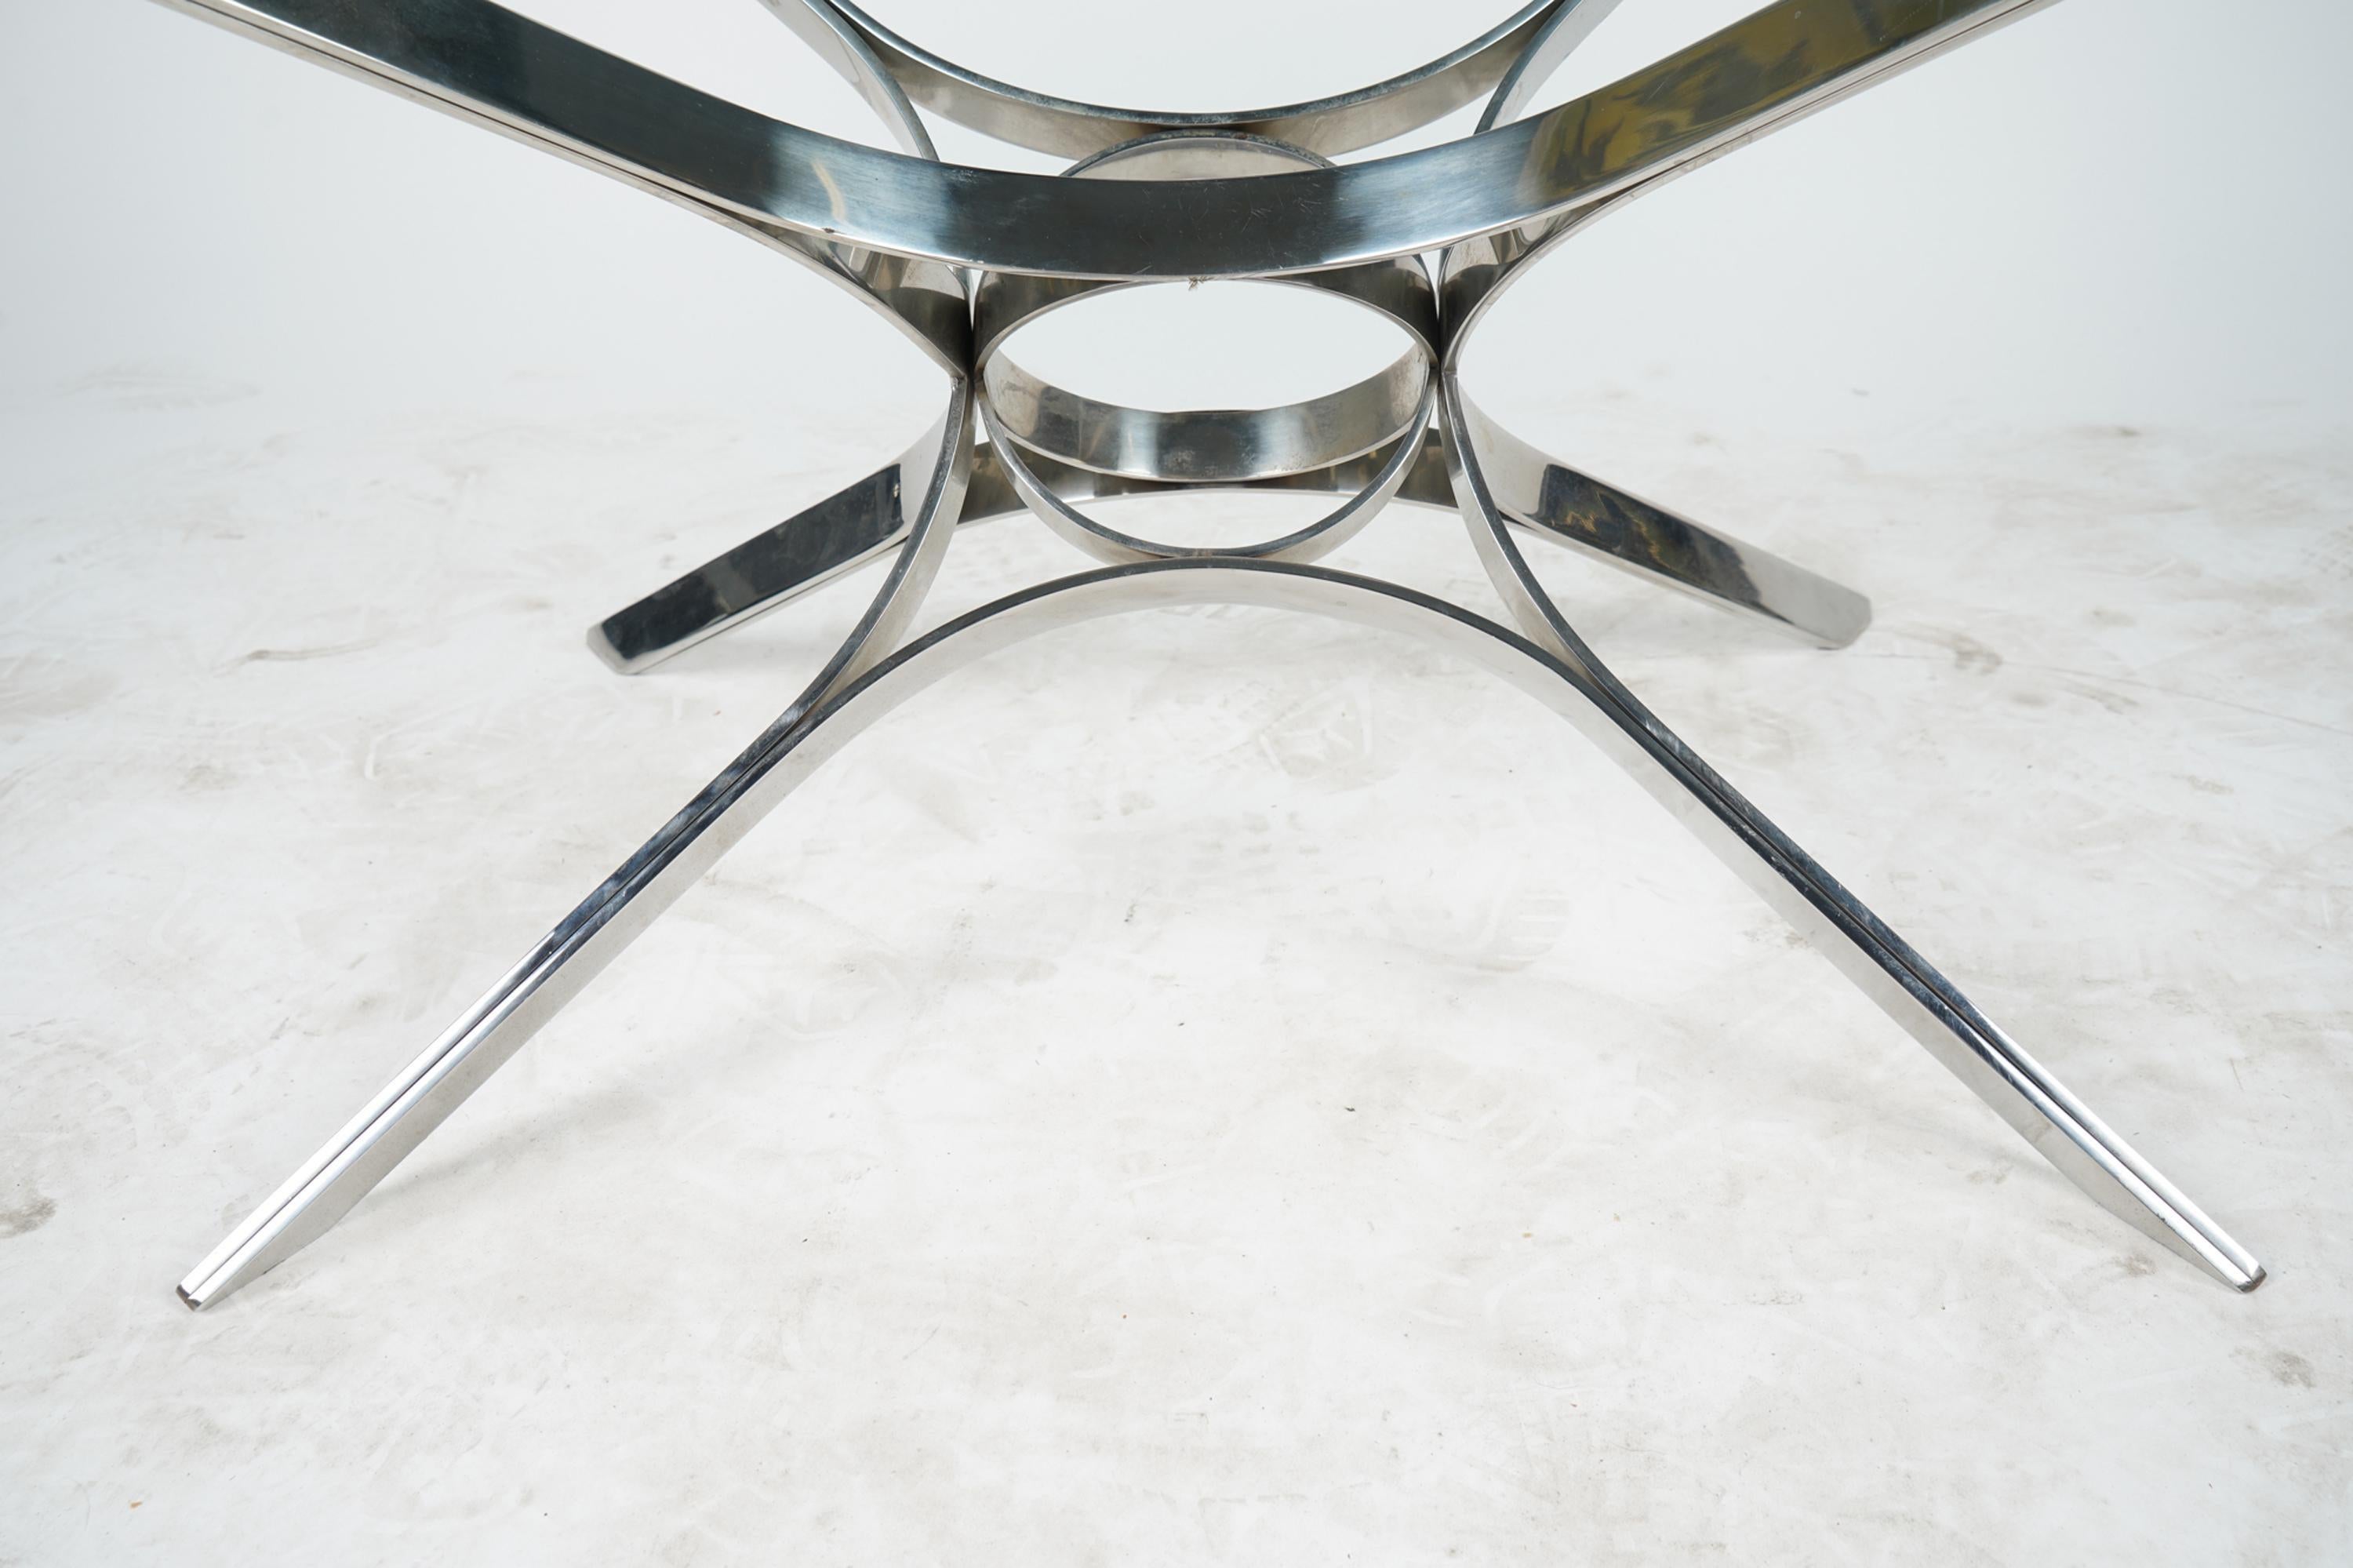 Modern Sculptural Chrome and Glass Coffee Table by Roger Sprunger for Dunbar For Sale